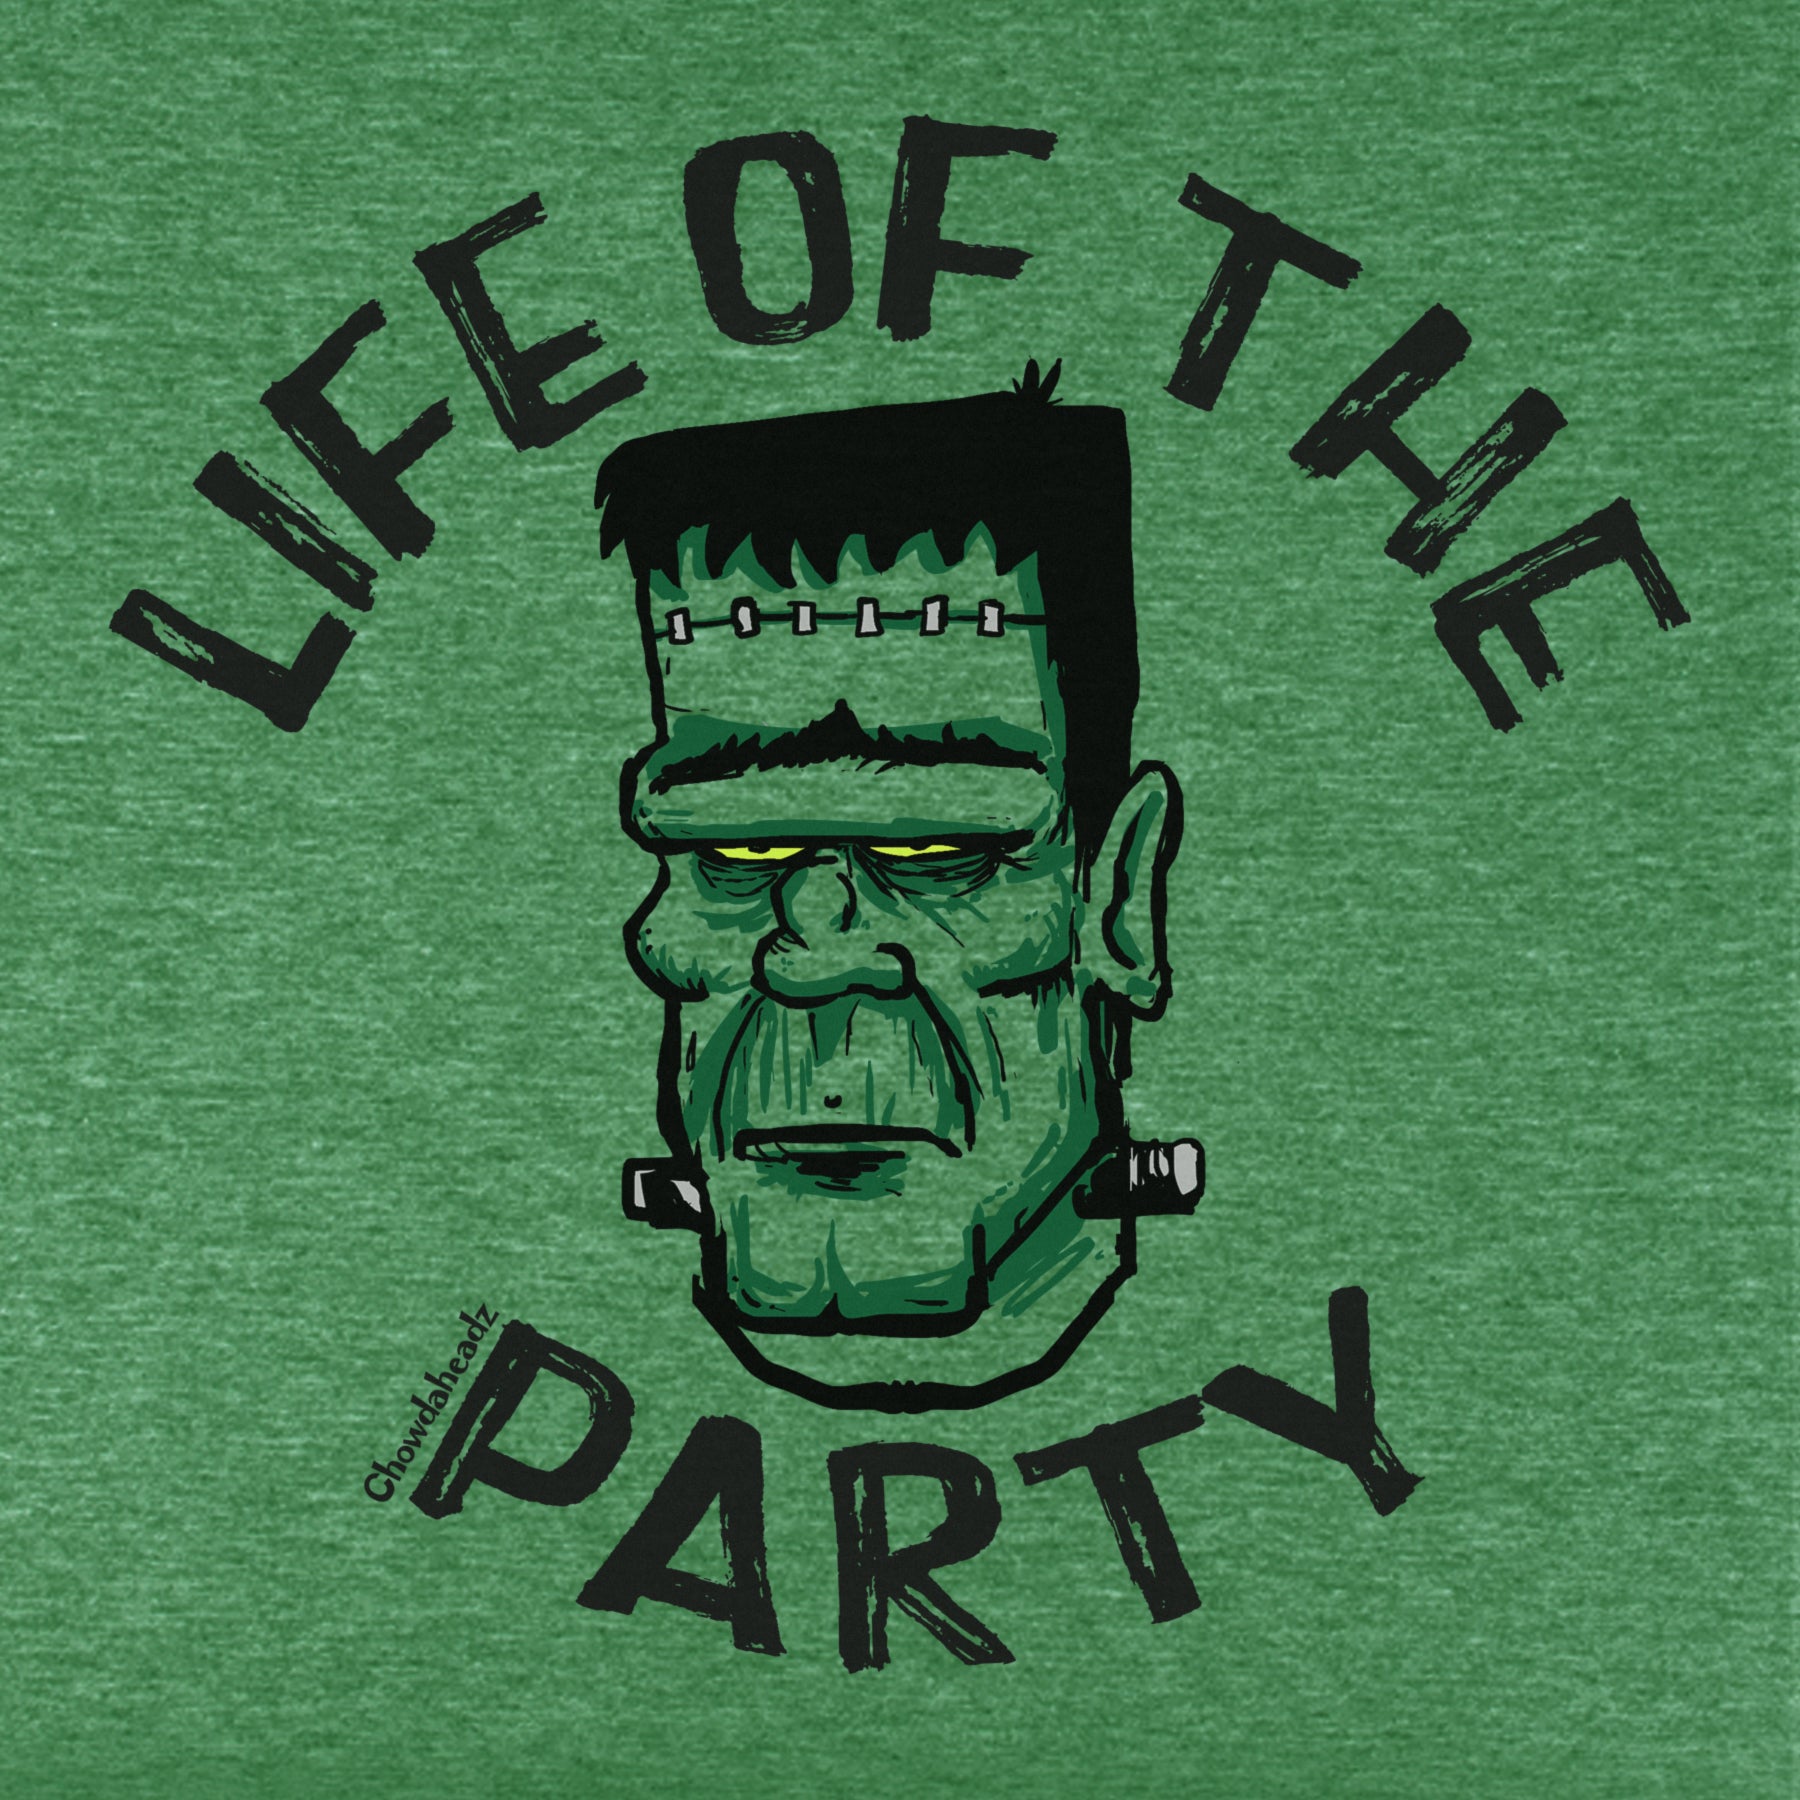 Life of the Party Youth T-Shirt - Chowdaheadz